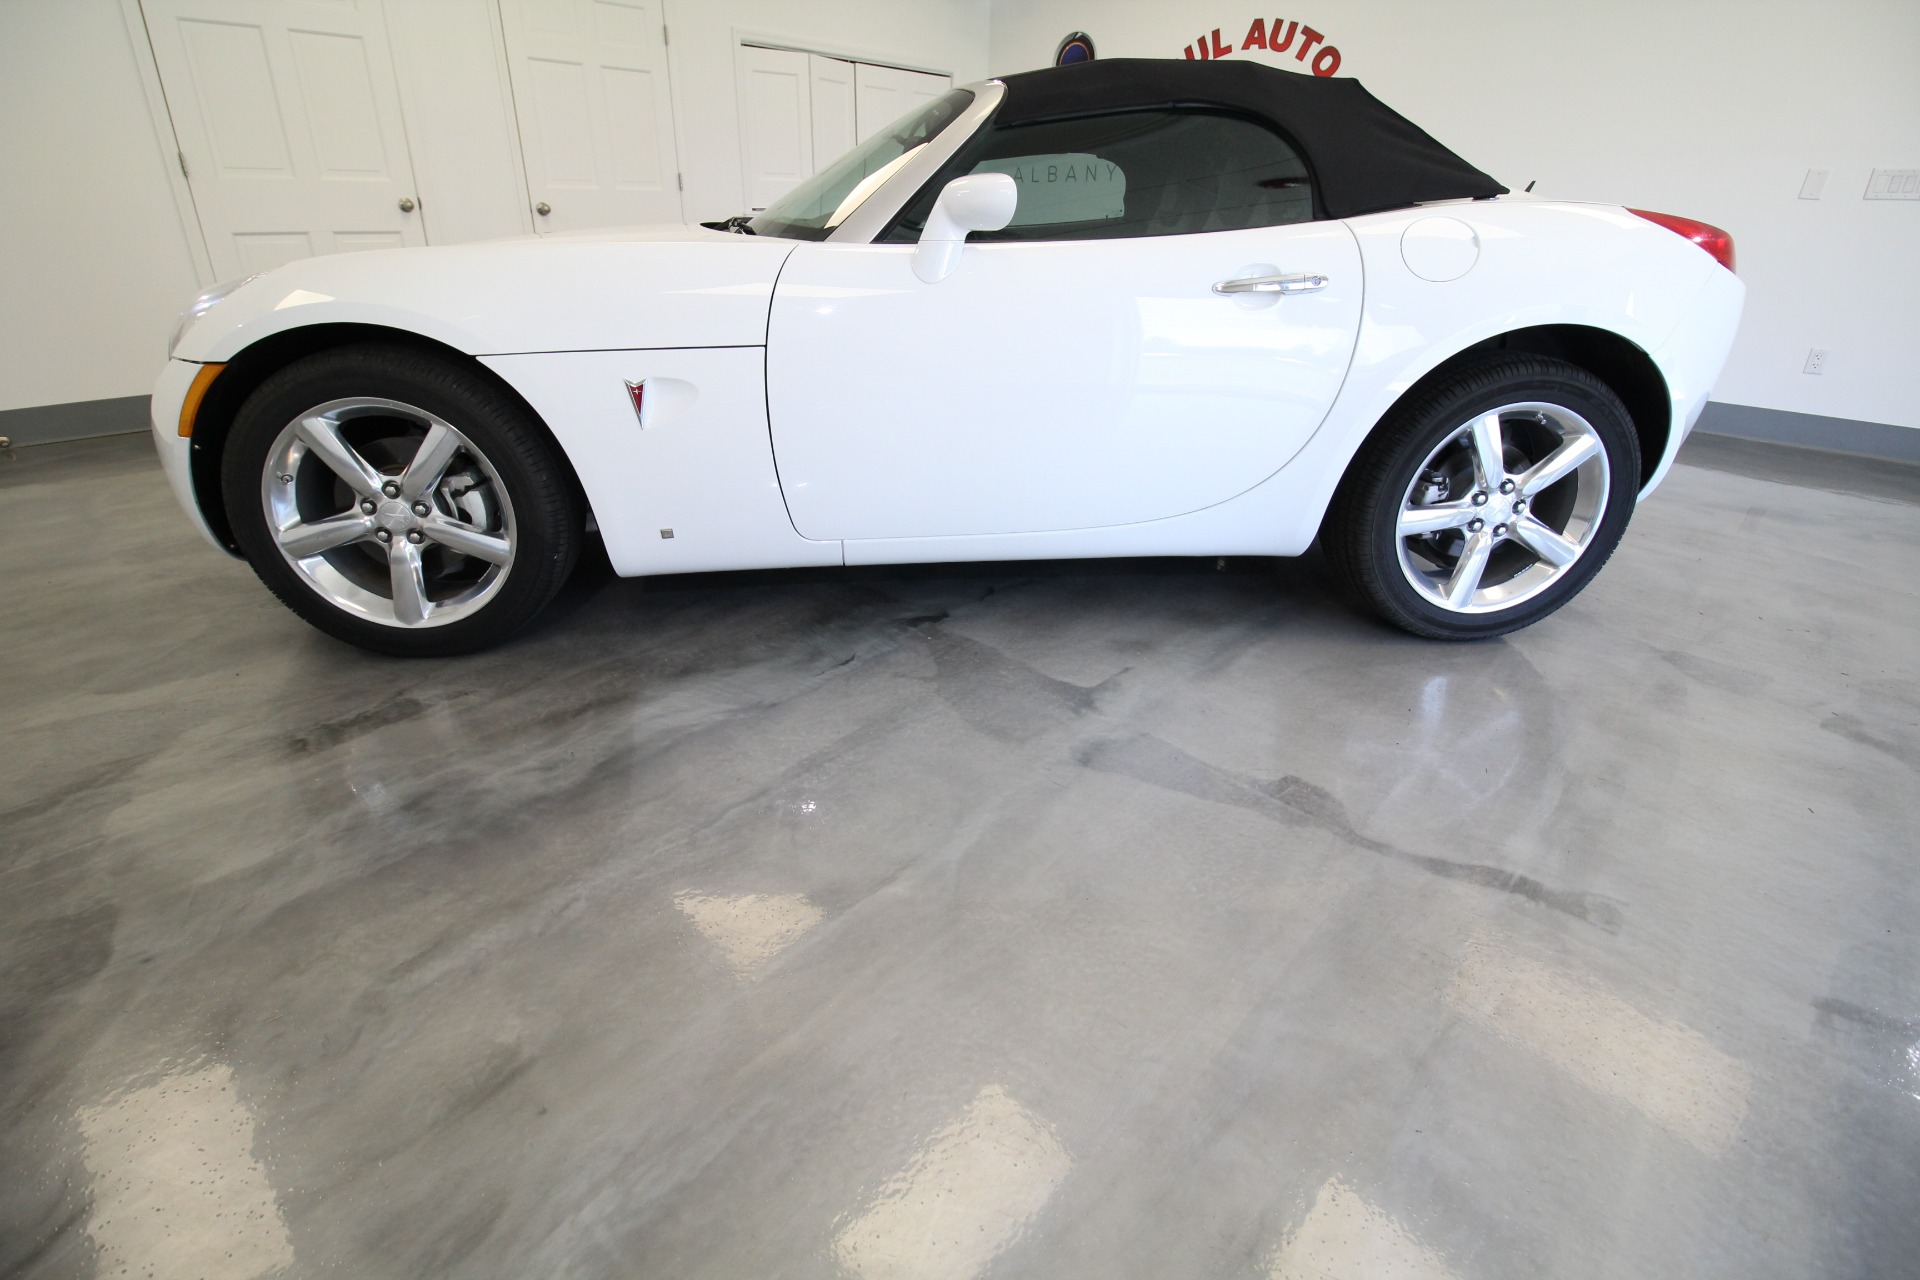 Used 2009 WHITE Pontiac Solstice LOW MILES 2 OWNER CAR SUPERB | Albany, NY